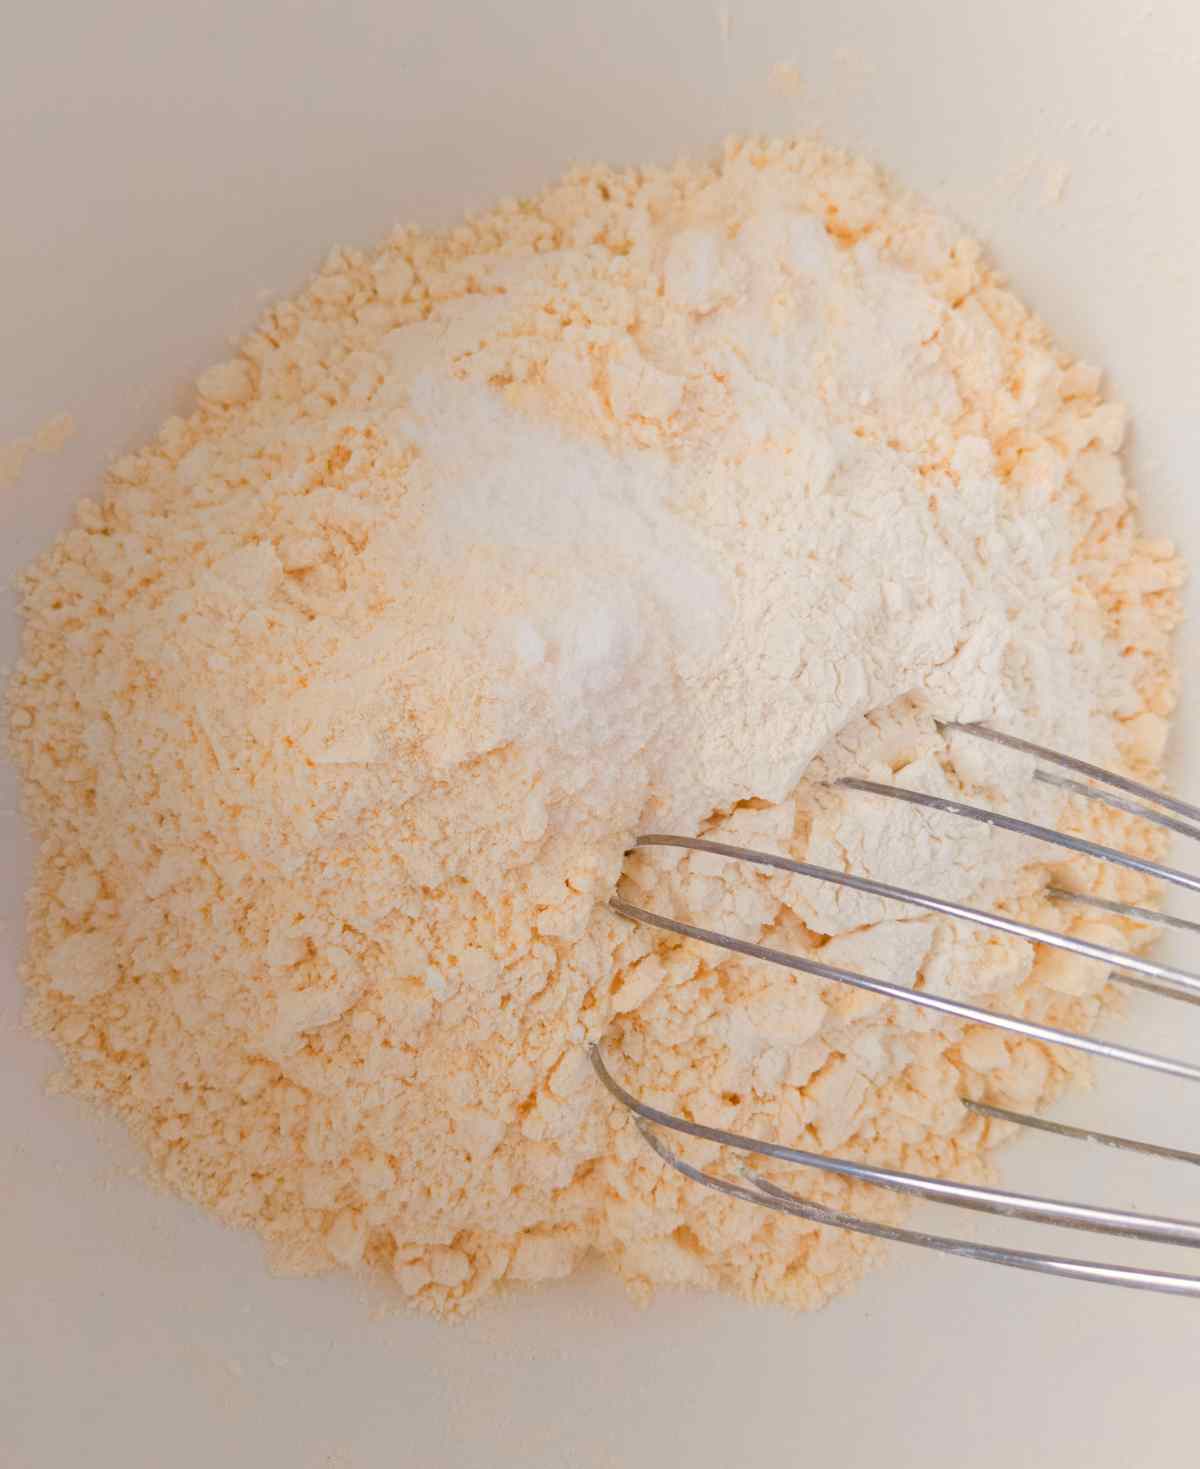 Mixing all the dry ingredients in a large mixing bowl with a whisk.